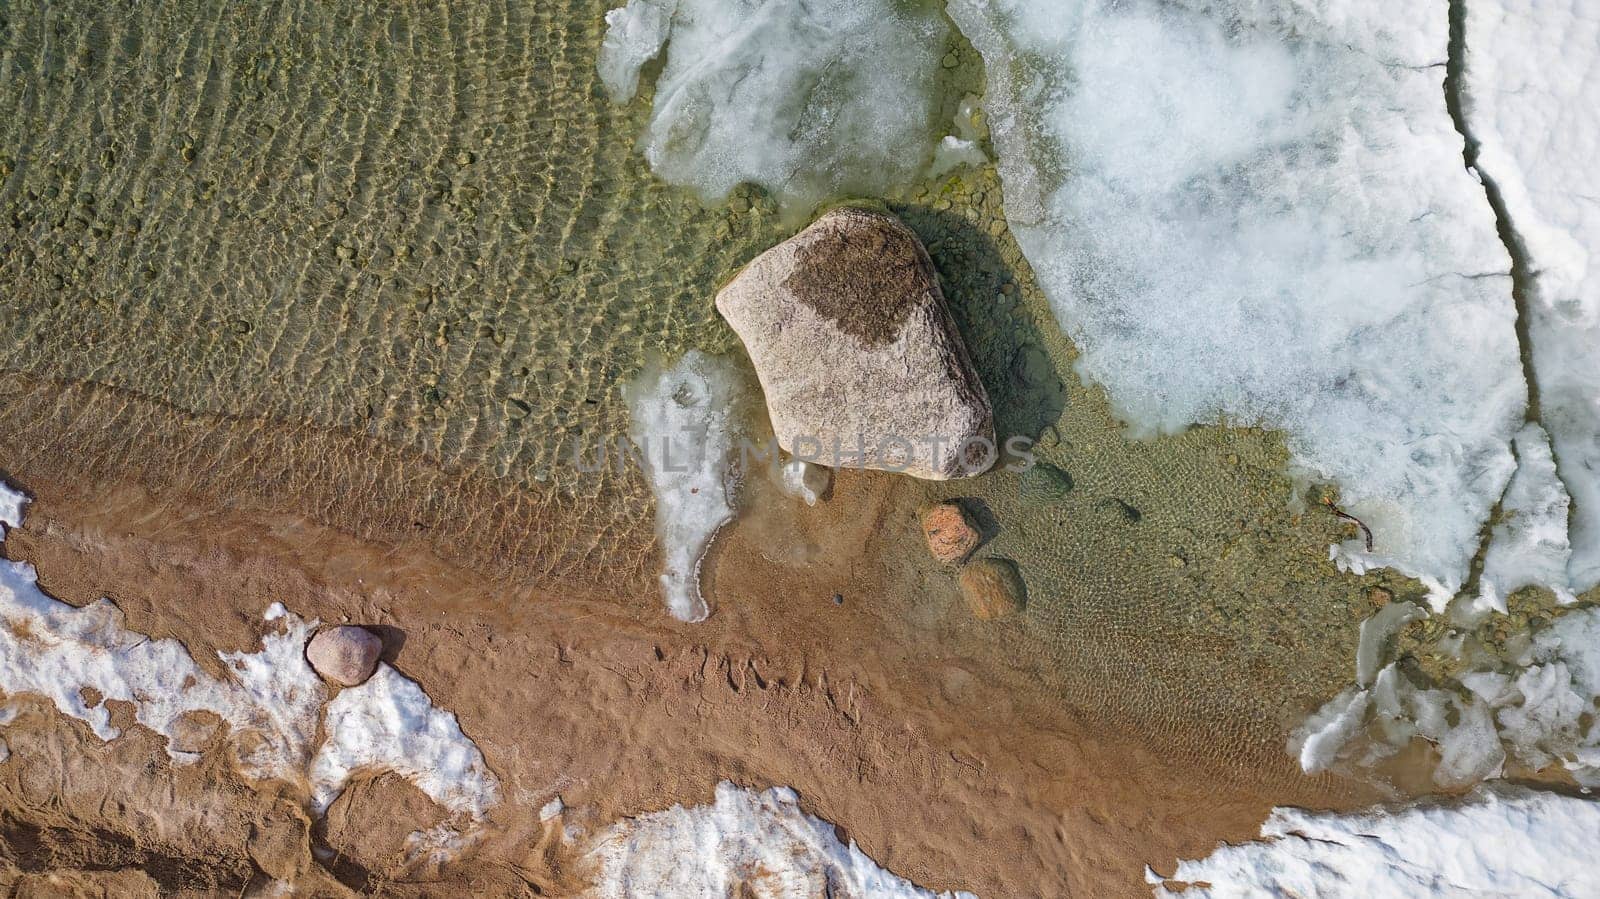 Drone shot of Georgian Bay Ice Pack Breaking Up and Melting in February when unseasonably warm by markvandam